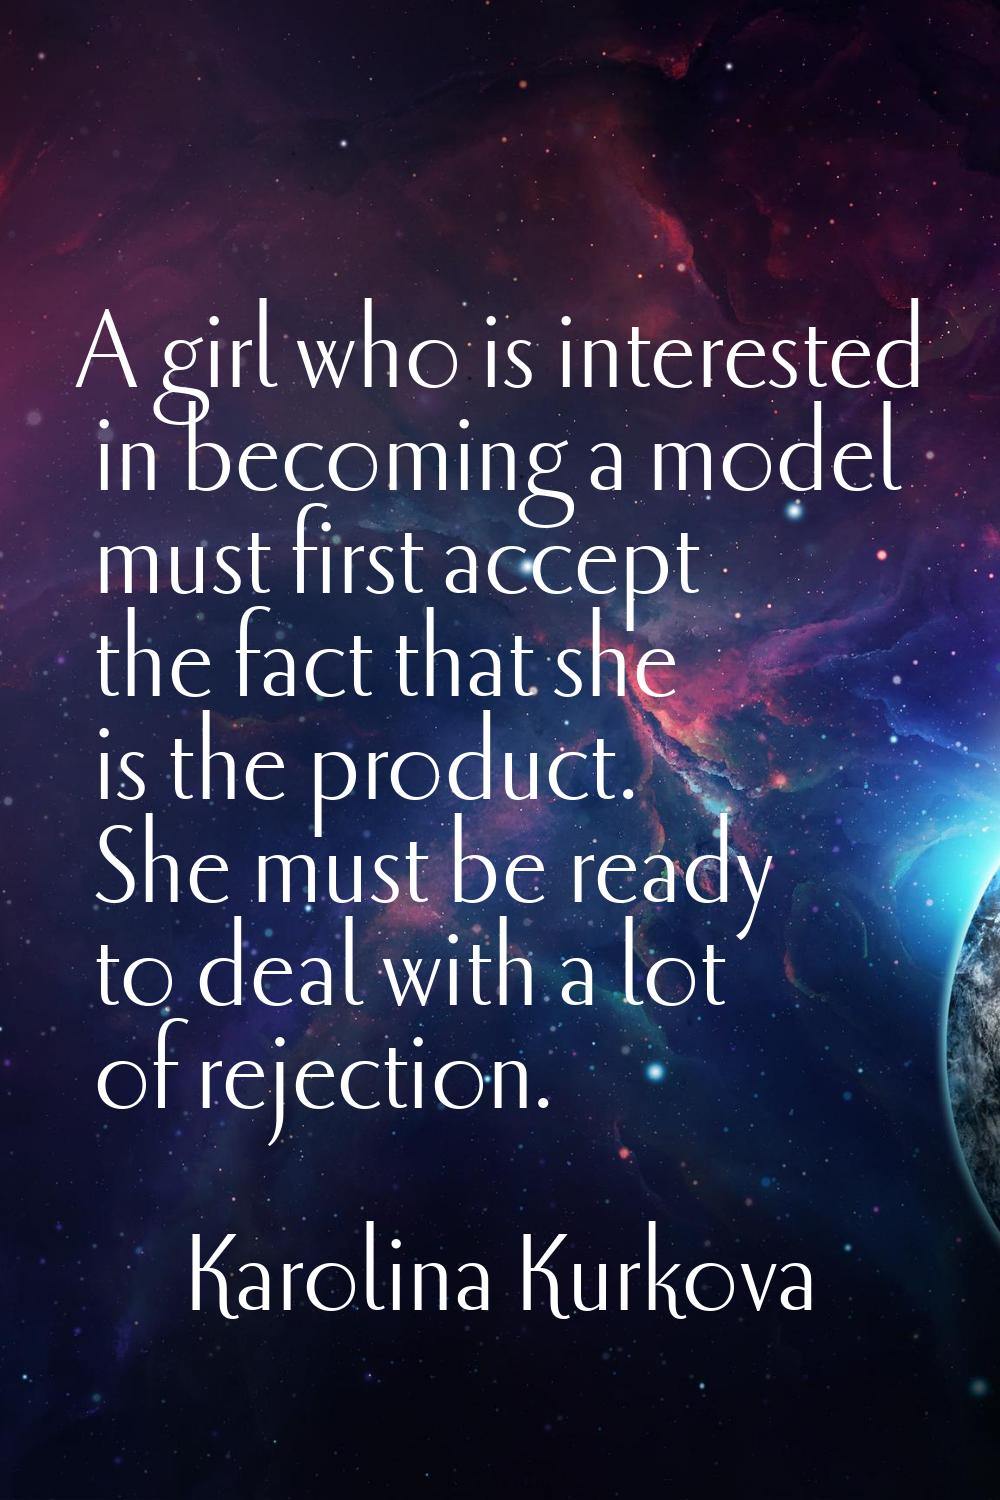 A girl who is interested in becoming a model must first accept the fact that she is the product. Sh